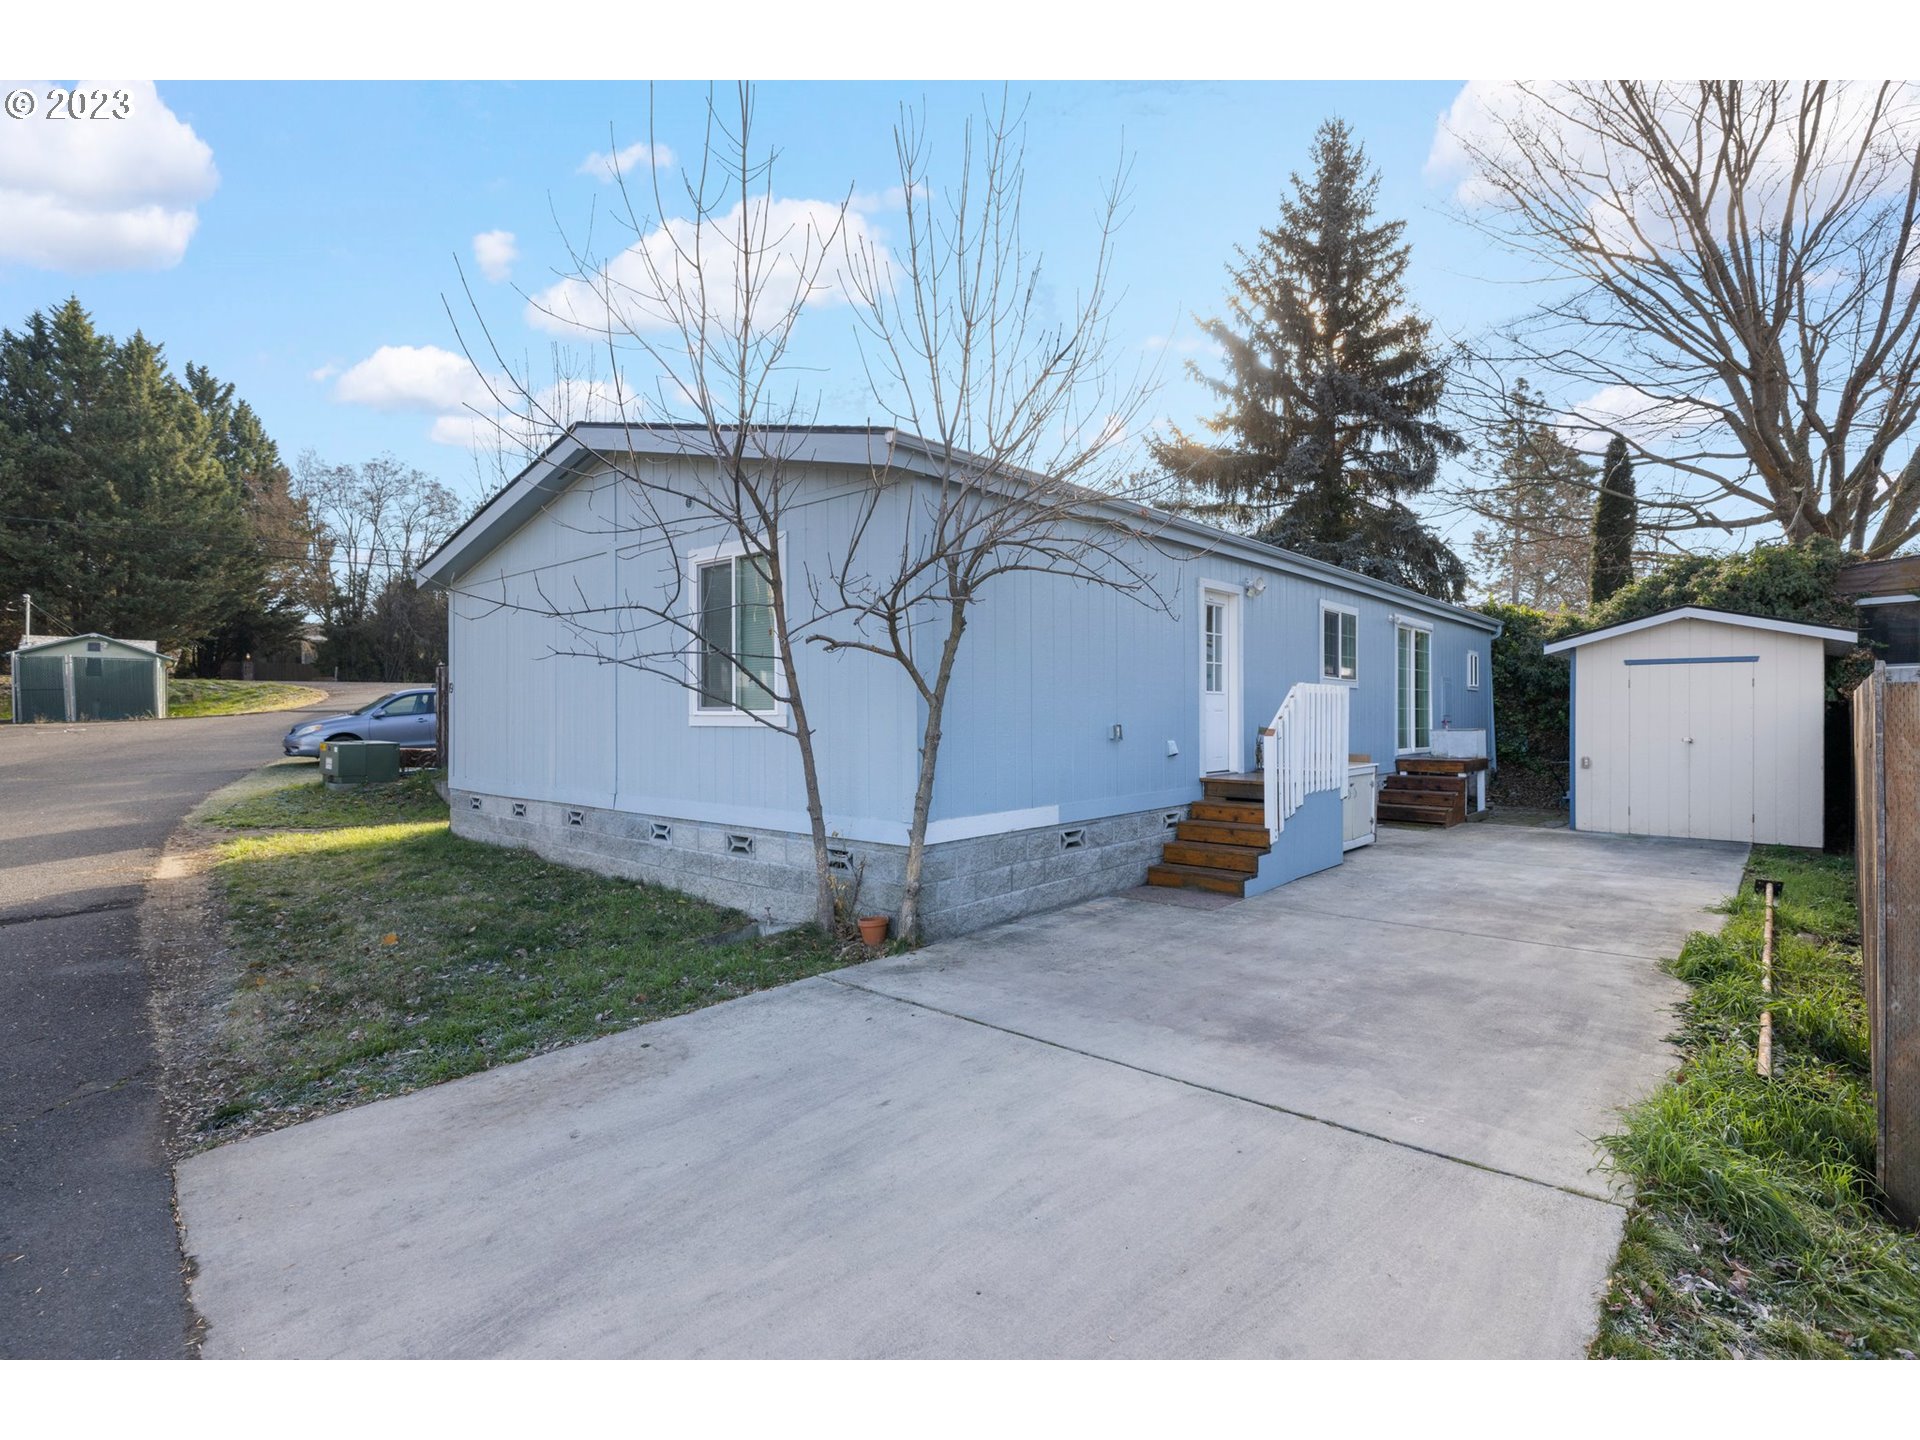 939 S VALLEY VIEW RD 19, Ashland, OR 